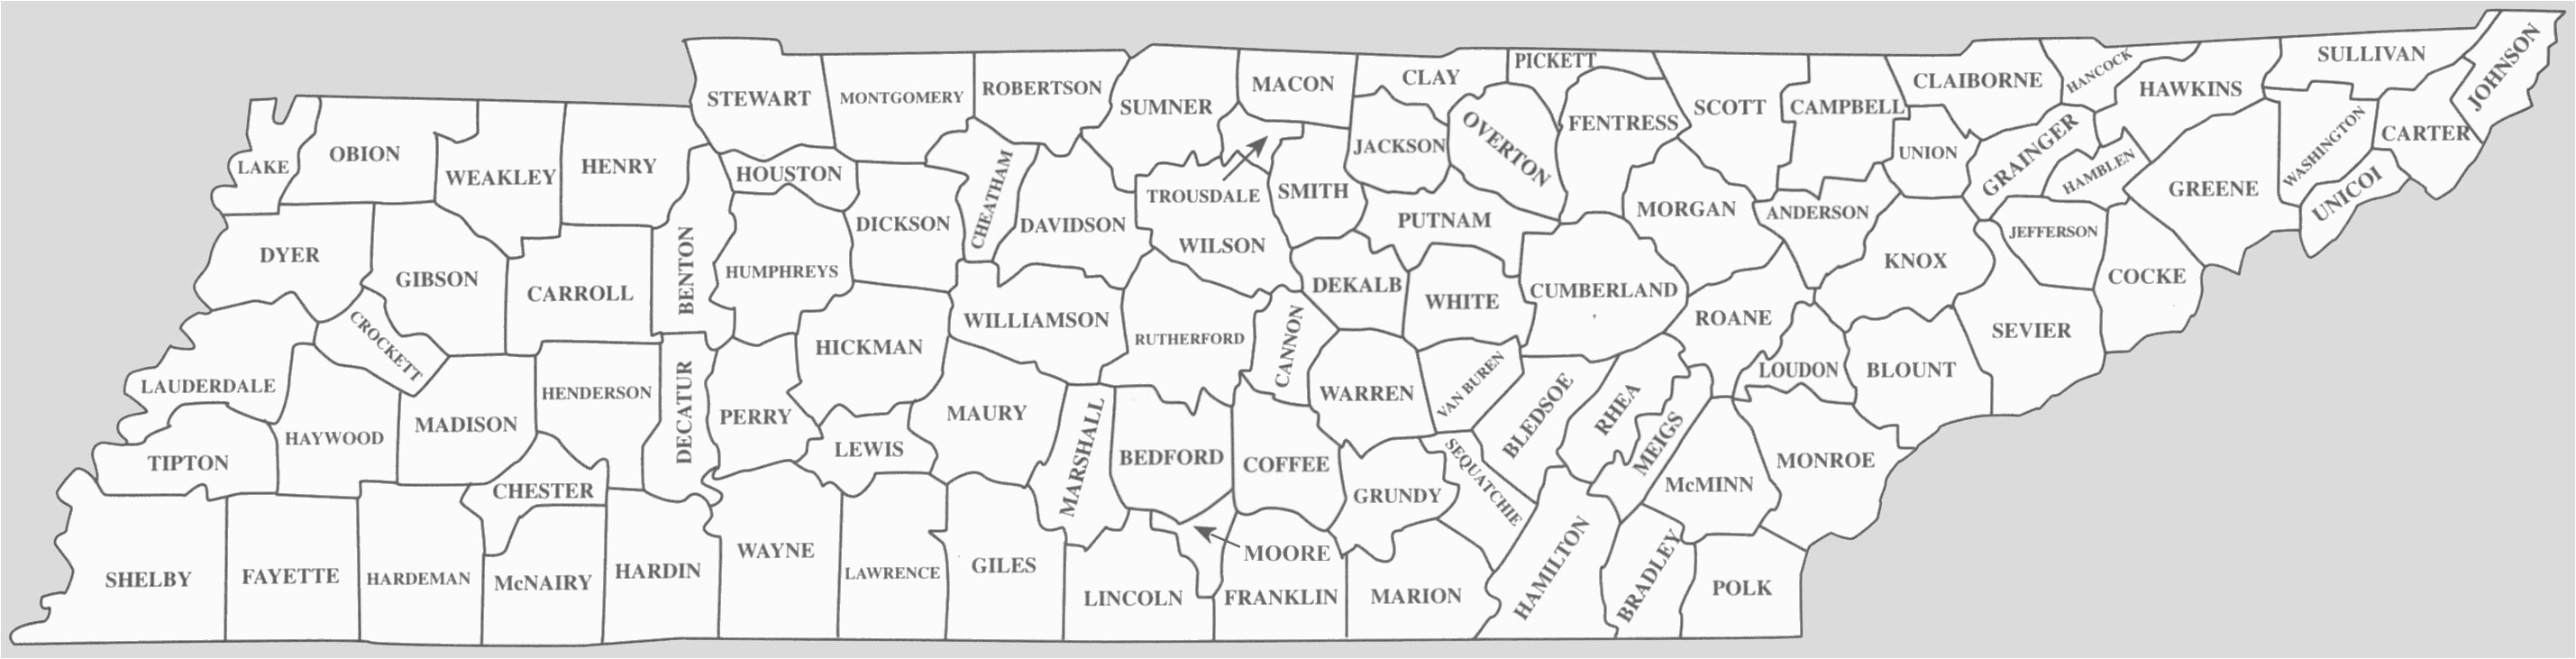 county map tenn and travel information download free county map tenn